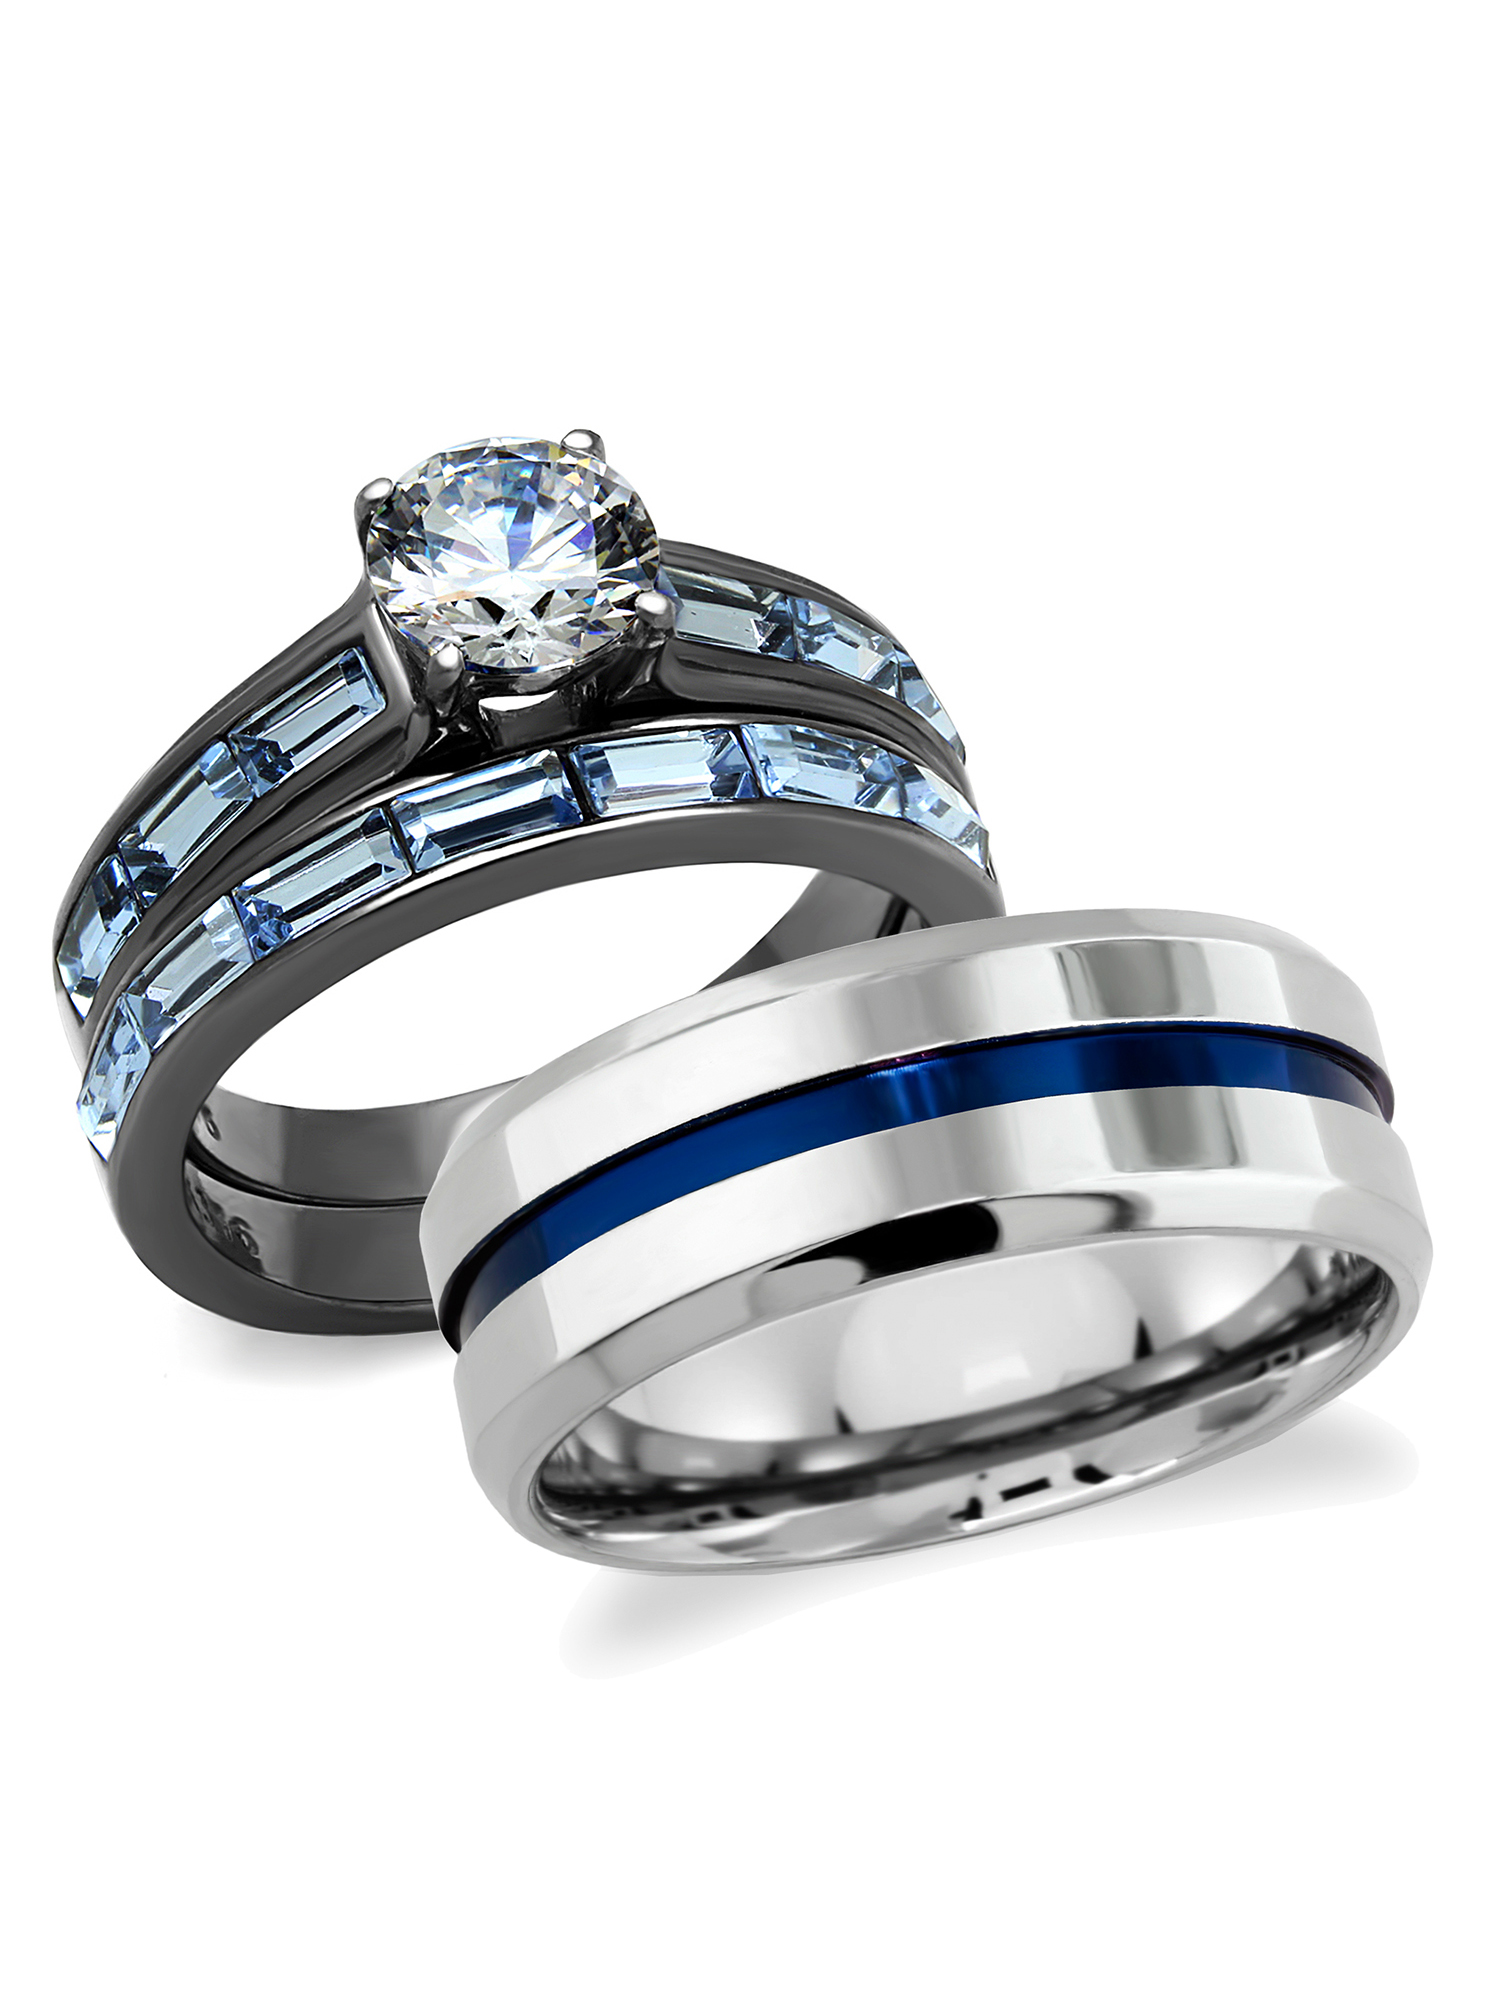 His and Hers Wedding Rings Set 316L Stainless Steel Cubic Zirconia Couples Rings (Women's Size 07 & Men's Size 09)